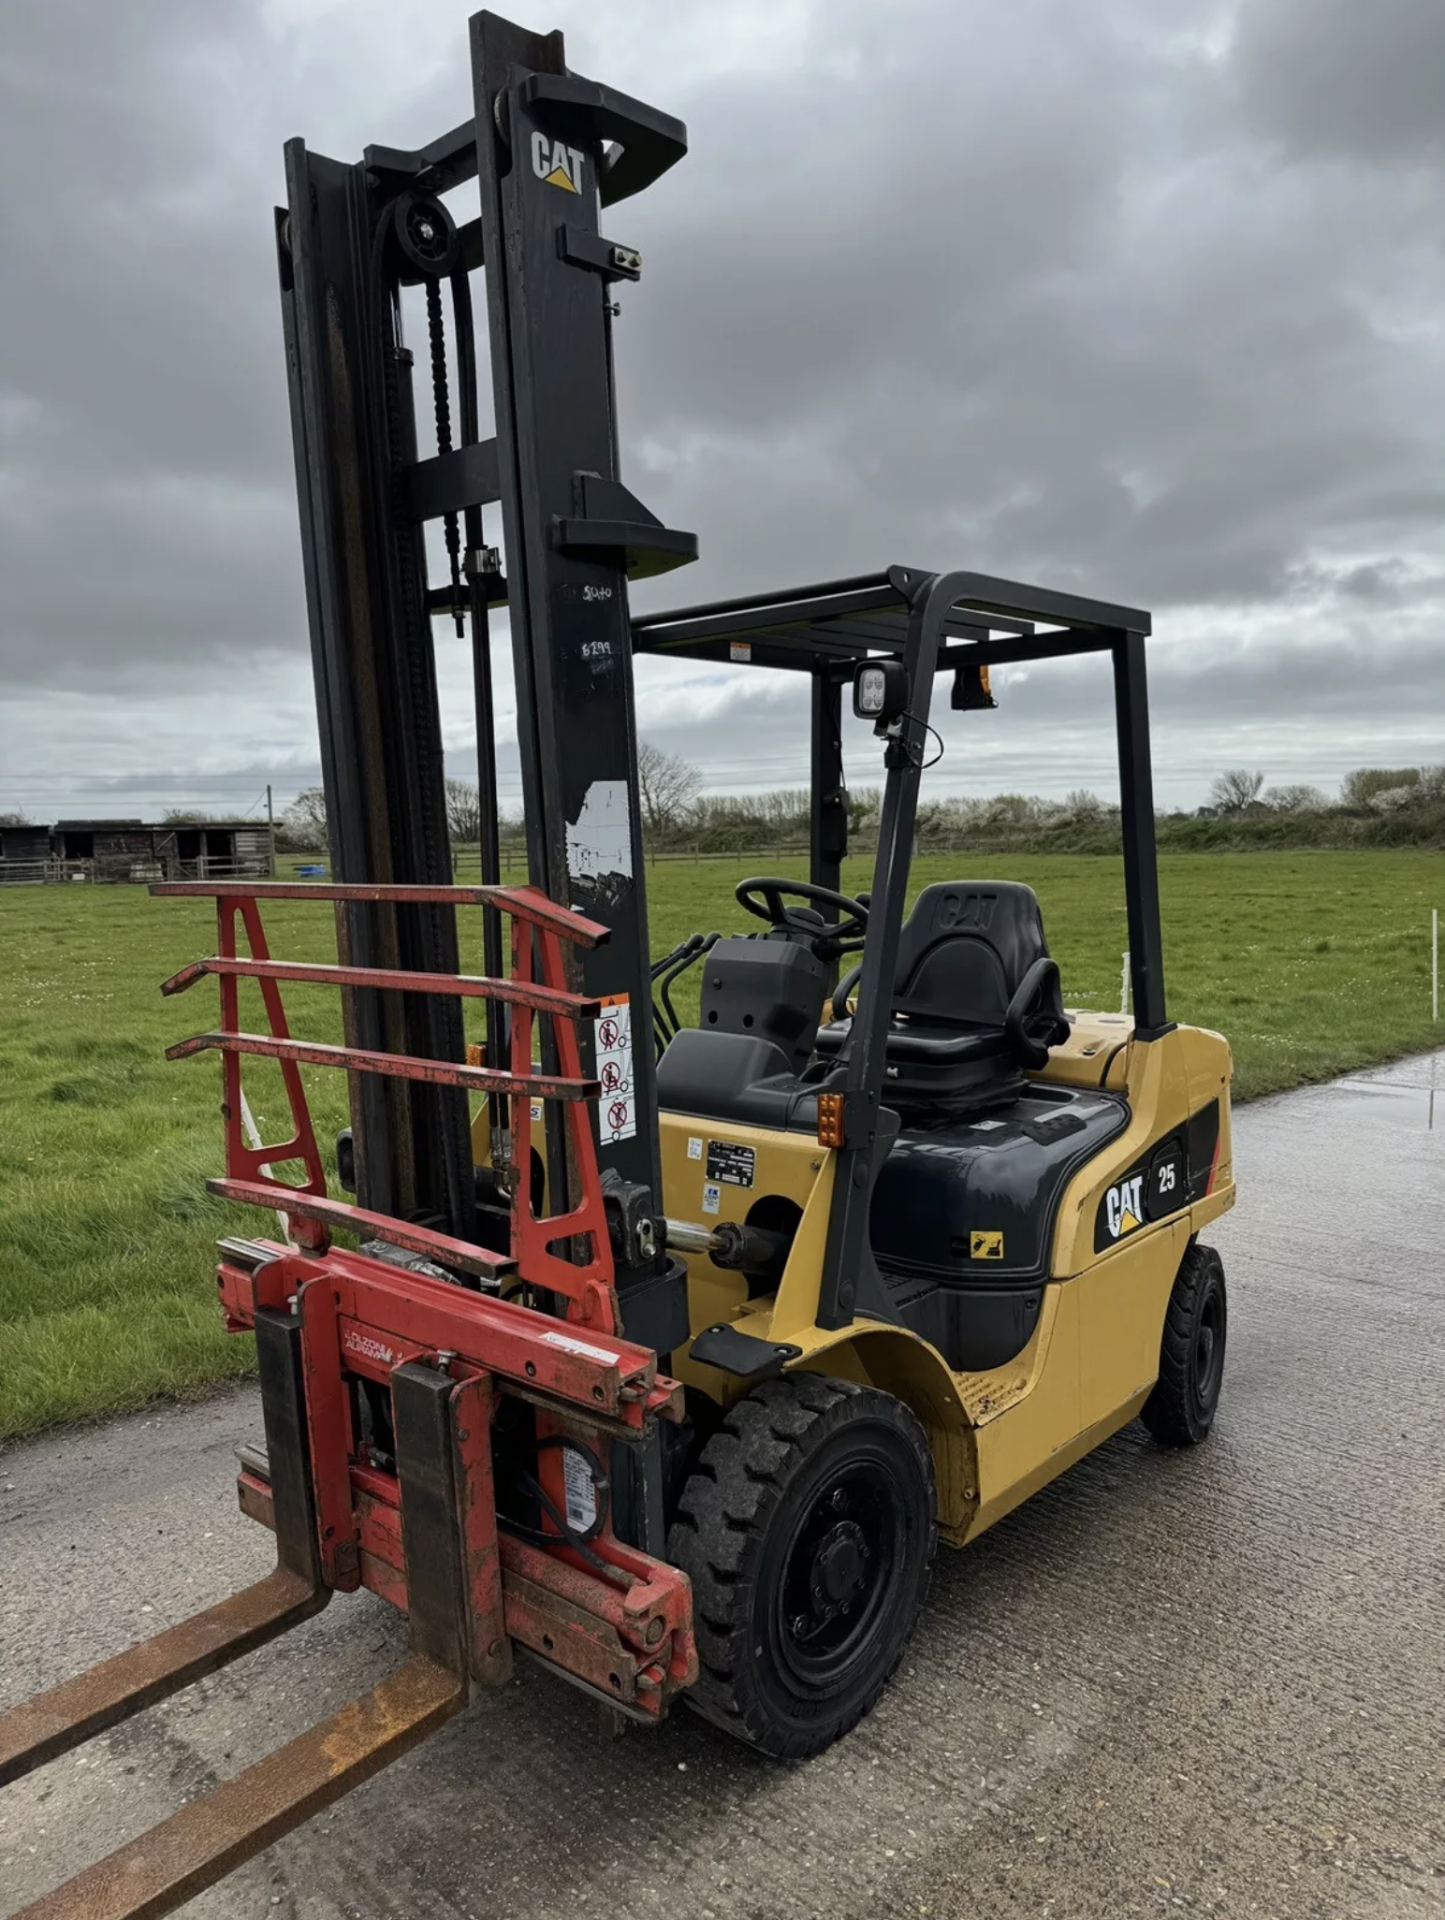 CATERPILLAR, 2.5 Tonne Diesel Forklift - 2500 Hours From New) with fork spreader